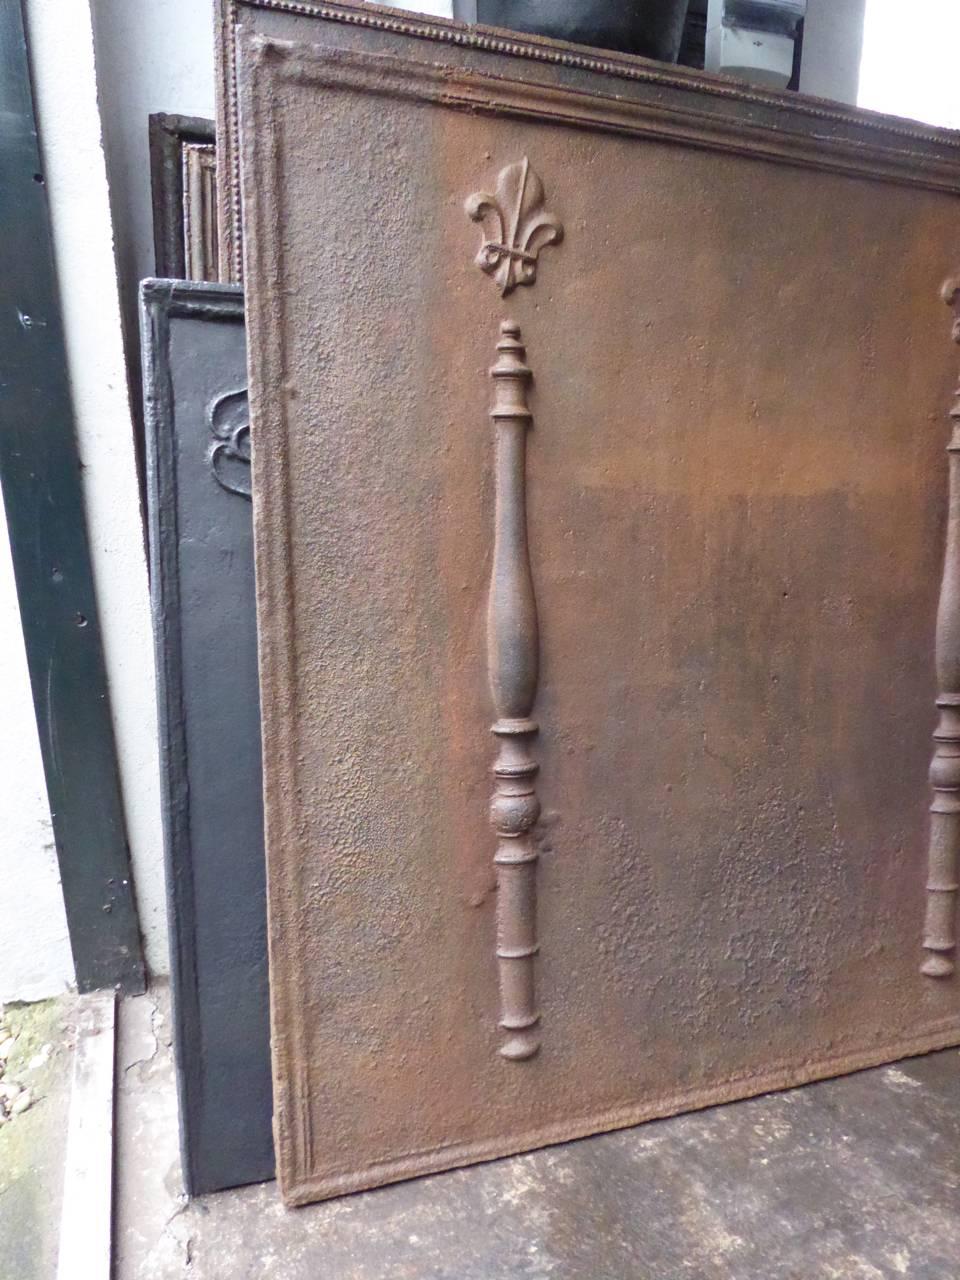 18th century French fireback with pillars and fleur-de-lis.

Fleur-de-lis (lilies) are symbols for purity. They were often used by royalty and aristocracy around Europe and specifically by the House of Bourbon.

The pillar refers to the club of